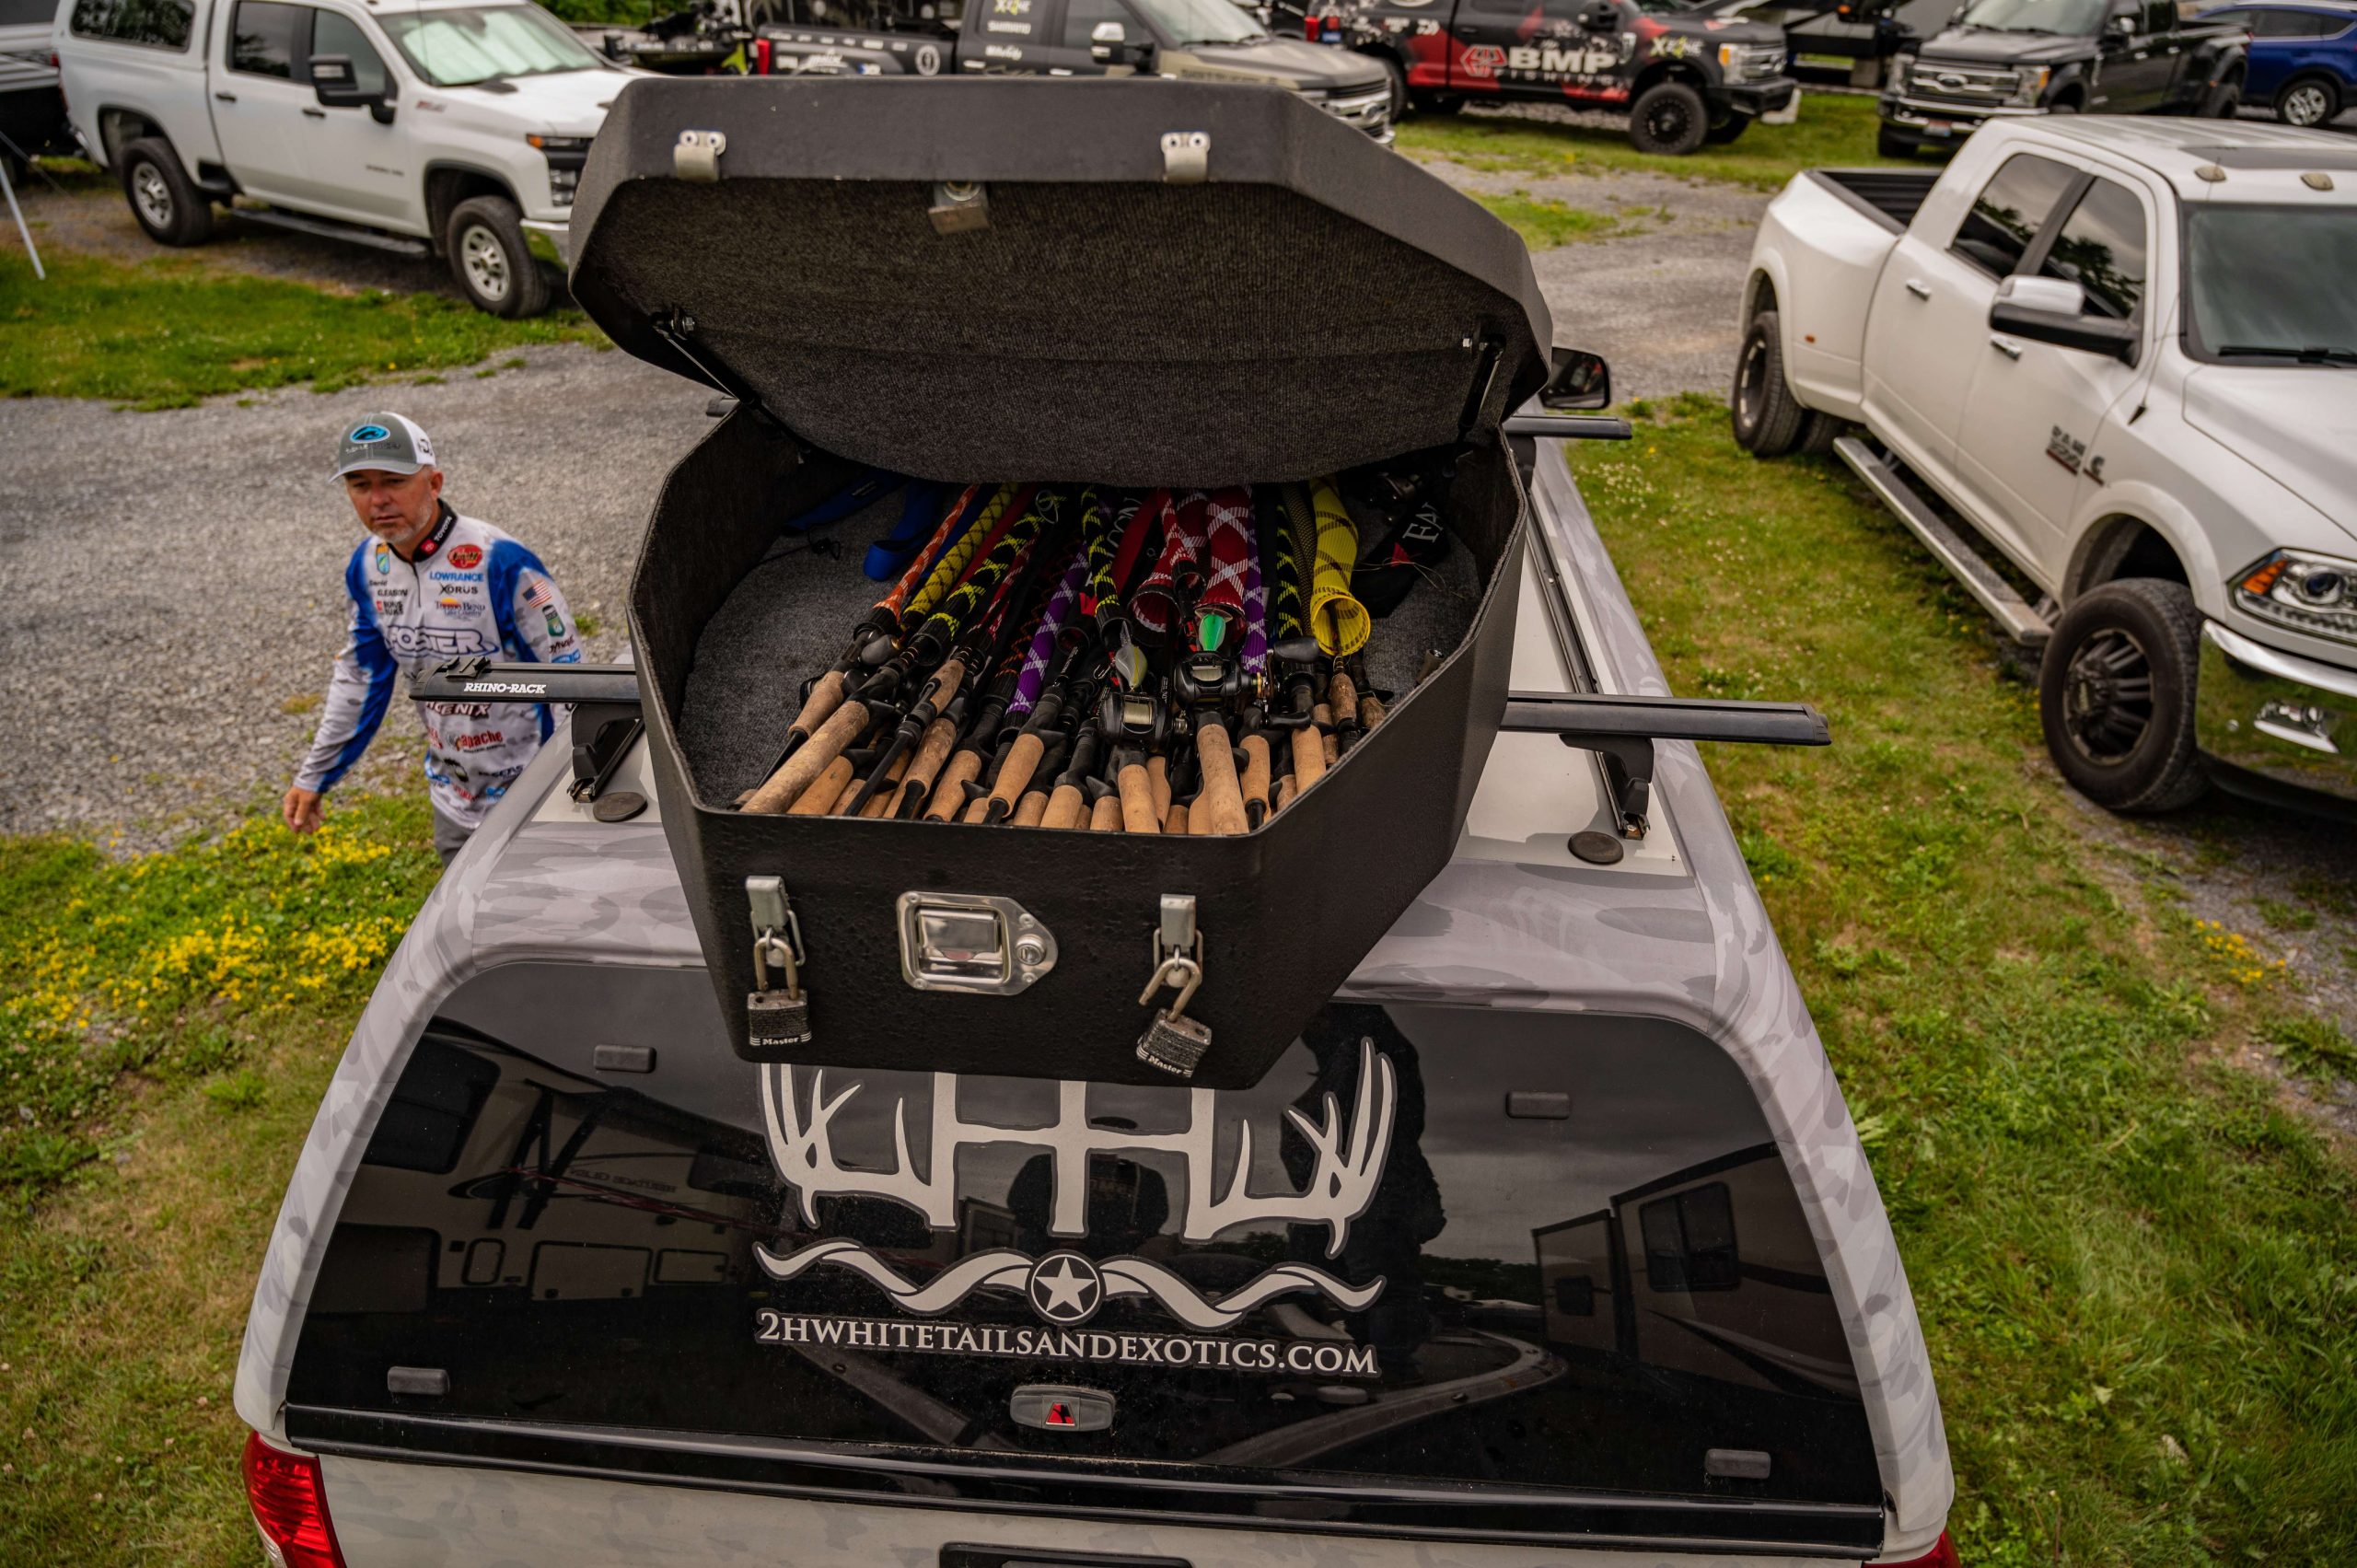 As Gleason travels the country, he needs his rods and reels kept safe and secure, but he also needs easy access. Gleason was prepping for an Elite Series tournament on Lake Champlain, so some of his Toledo combos were buried on top of his Toyota Tundra.